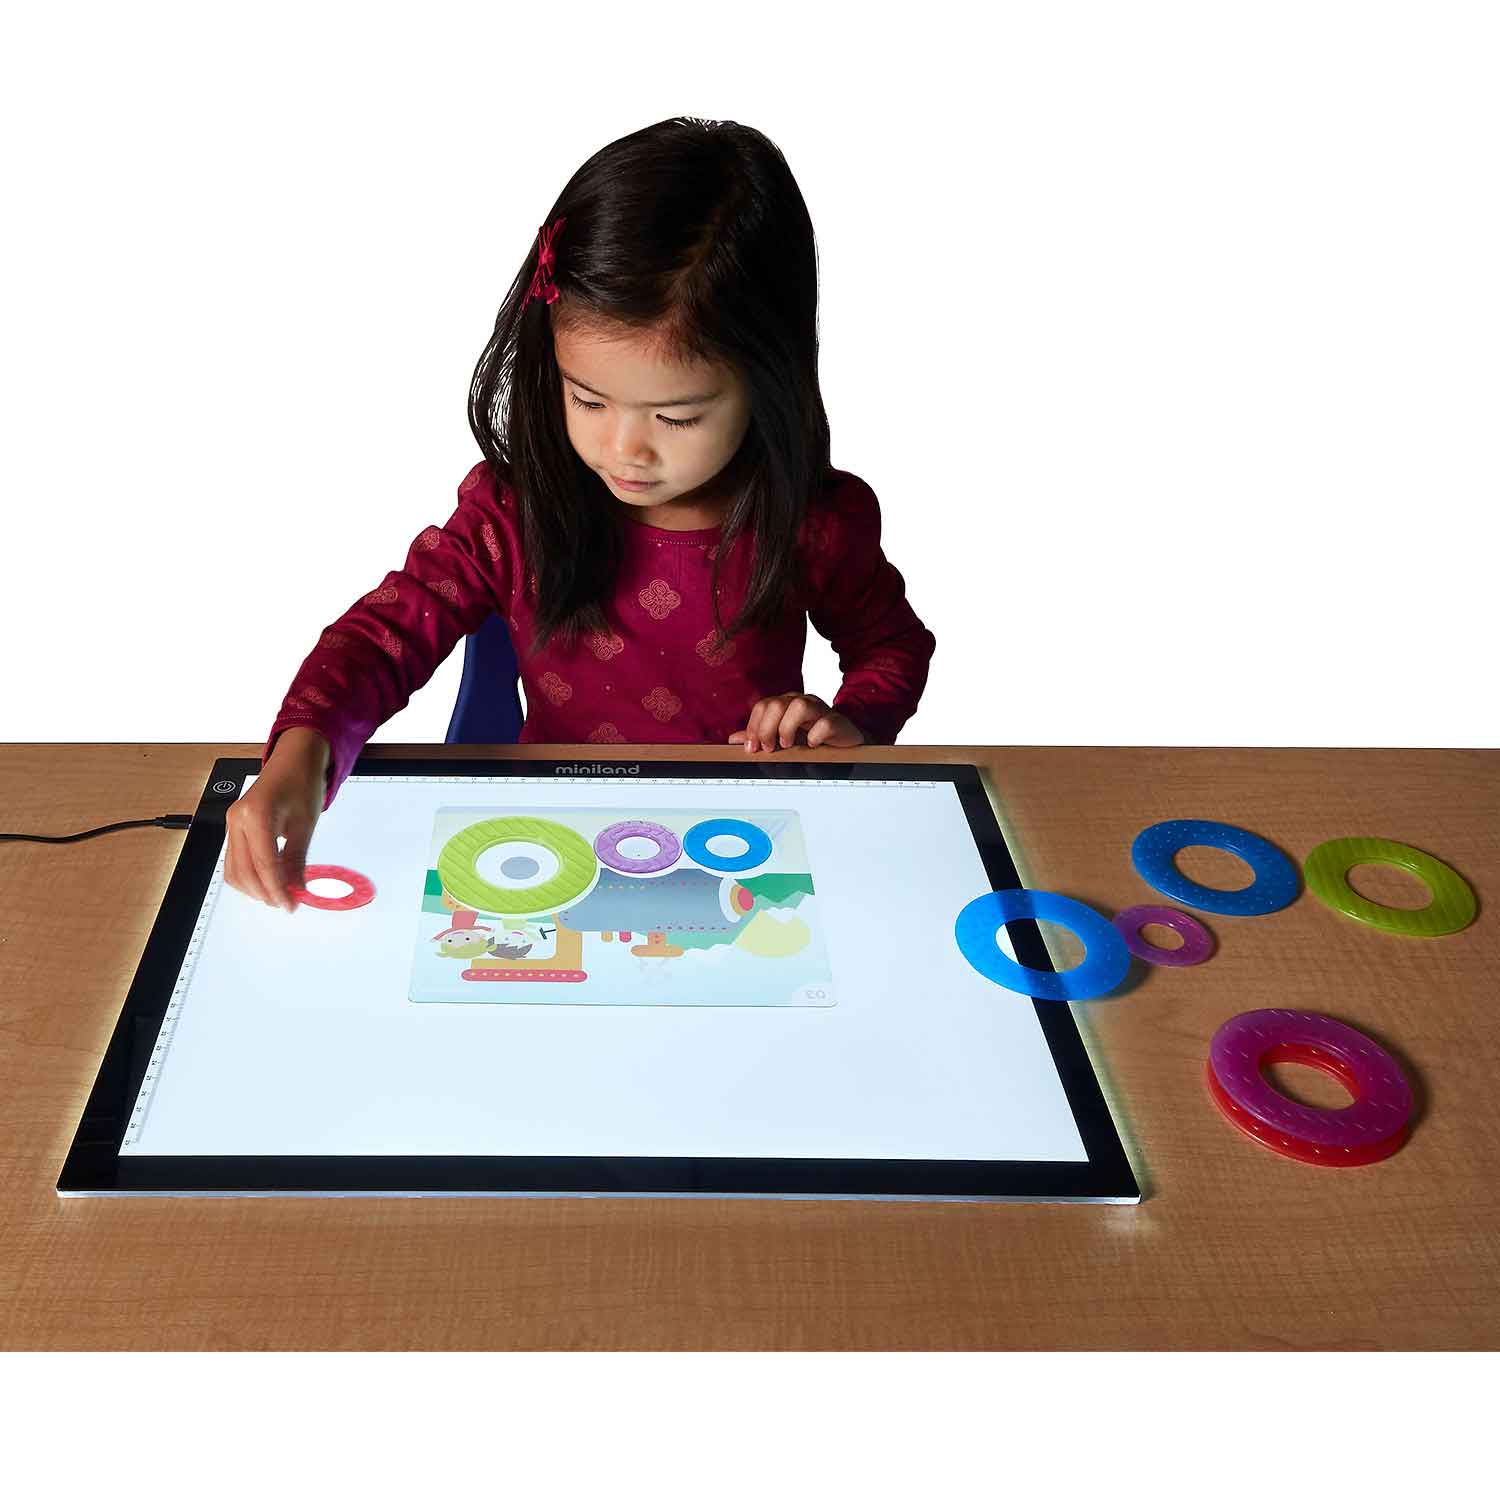 Portable Light Pad for Toddlers